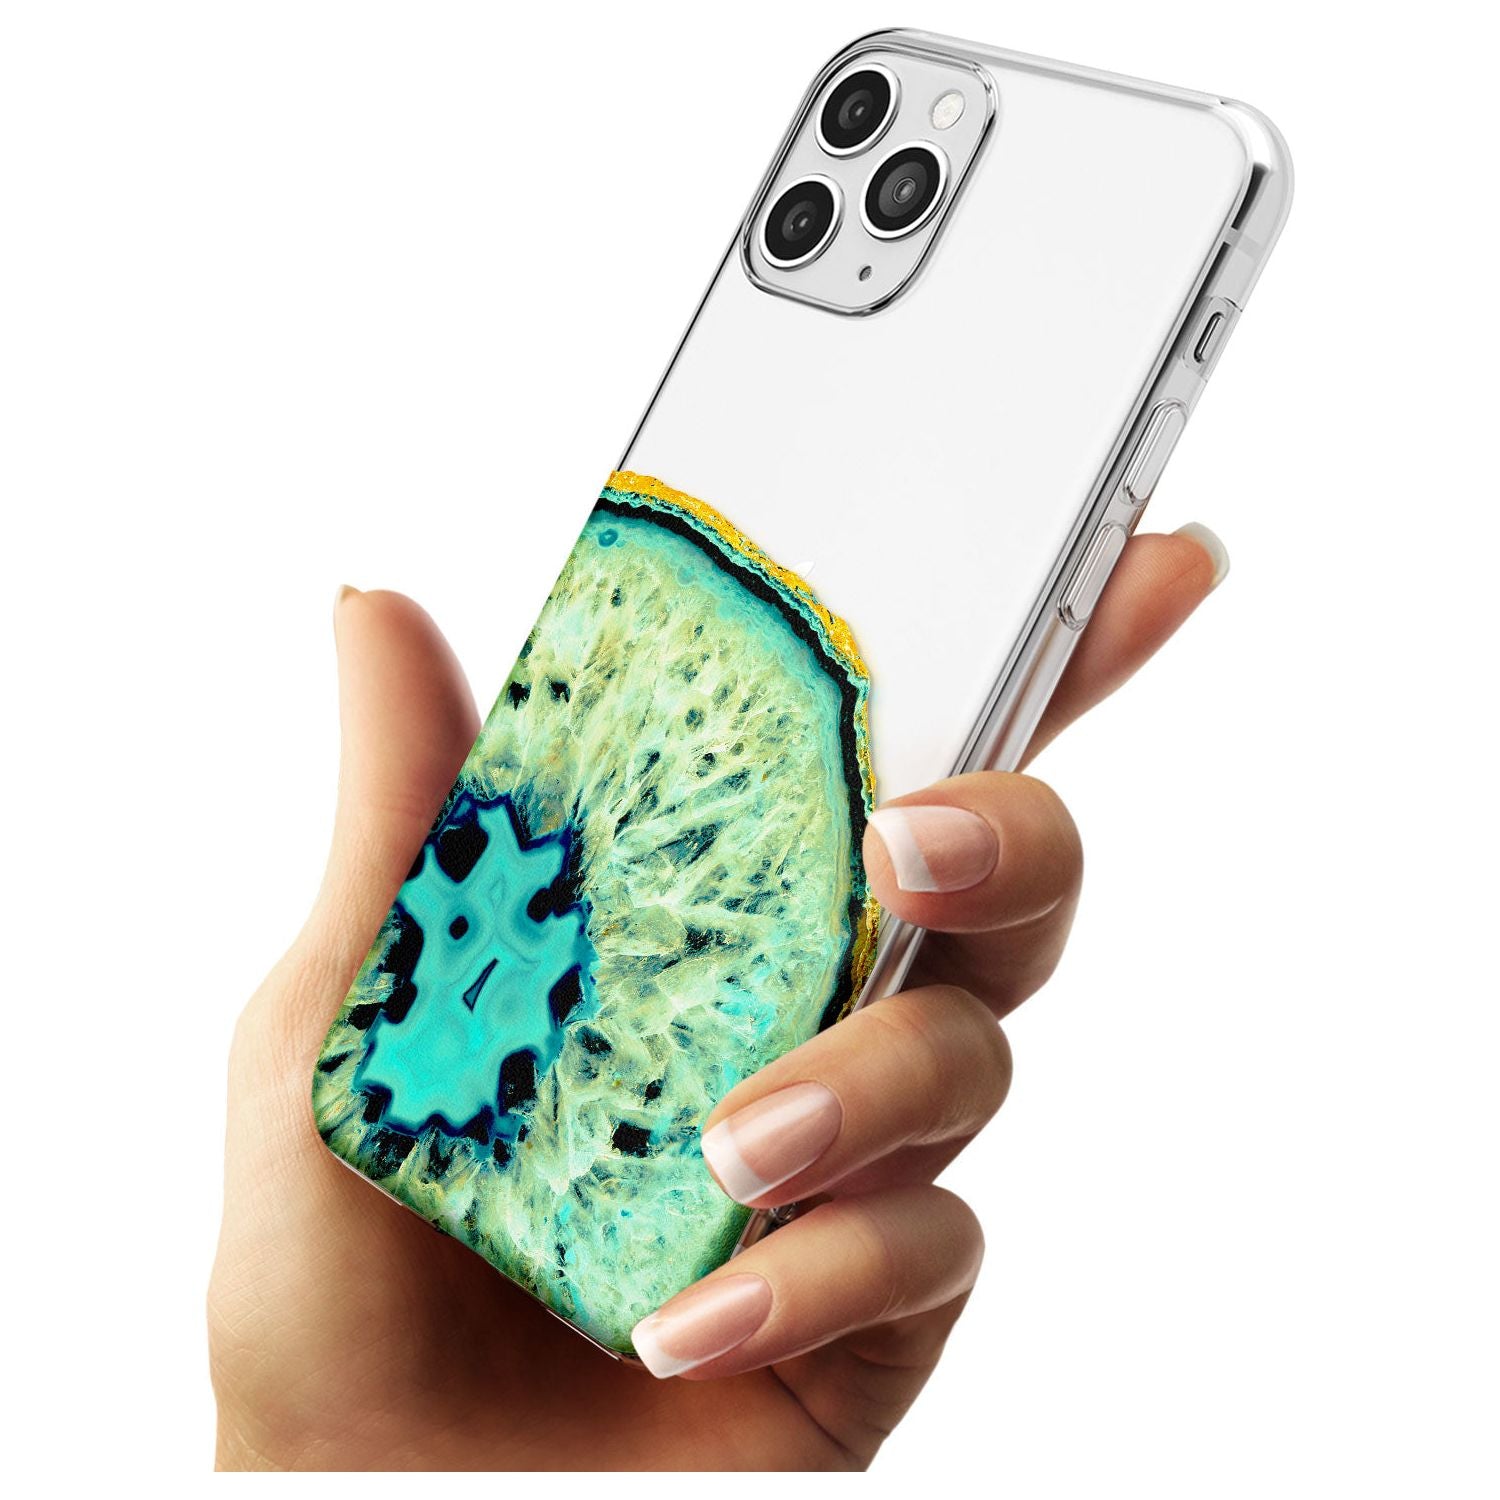 Turquoise & Green Gemstone Crystal Clear Design Slim TPU Phone Case for iPhone 11 Pro Max